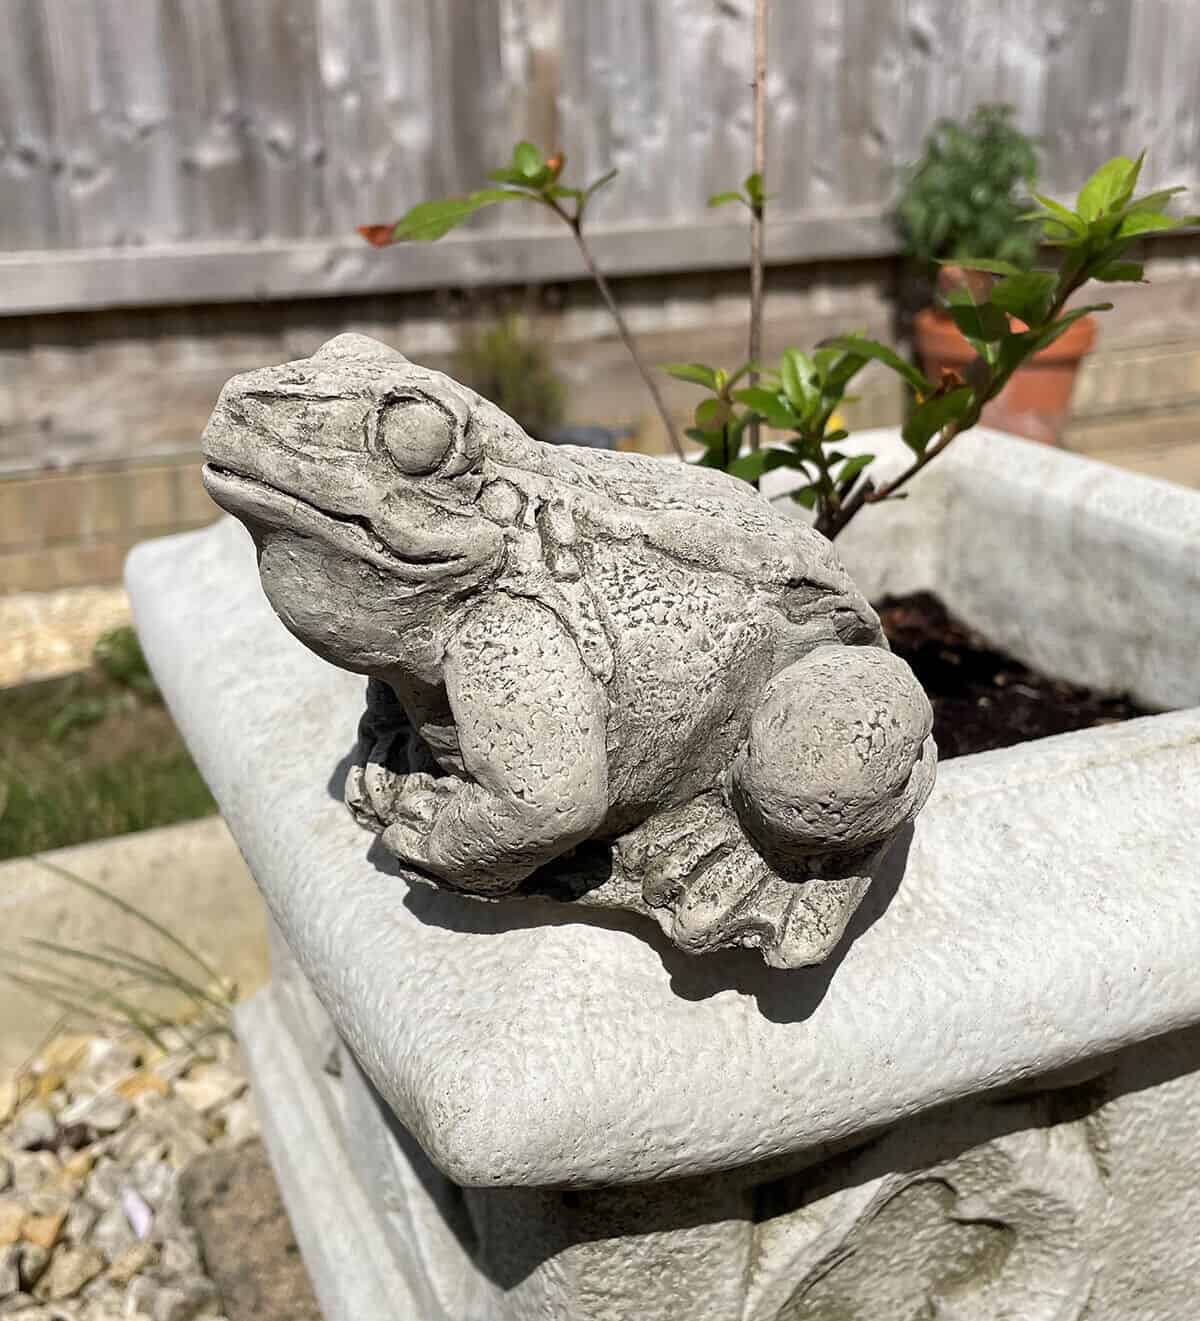 A warty frog in a crouched position with large eyes and hind legs. Situated on a flower pot in a British garden